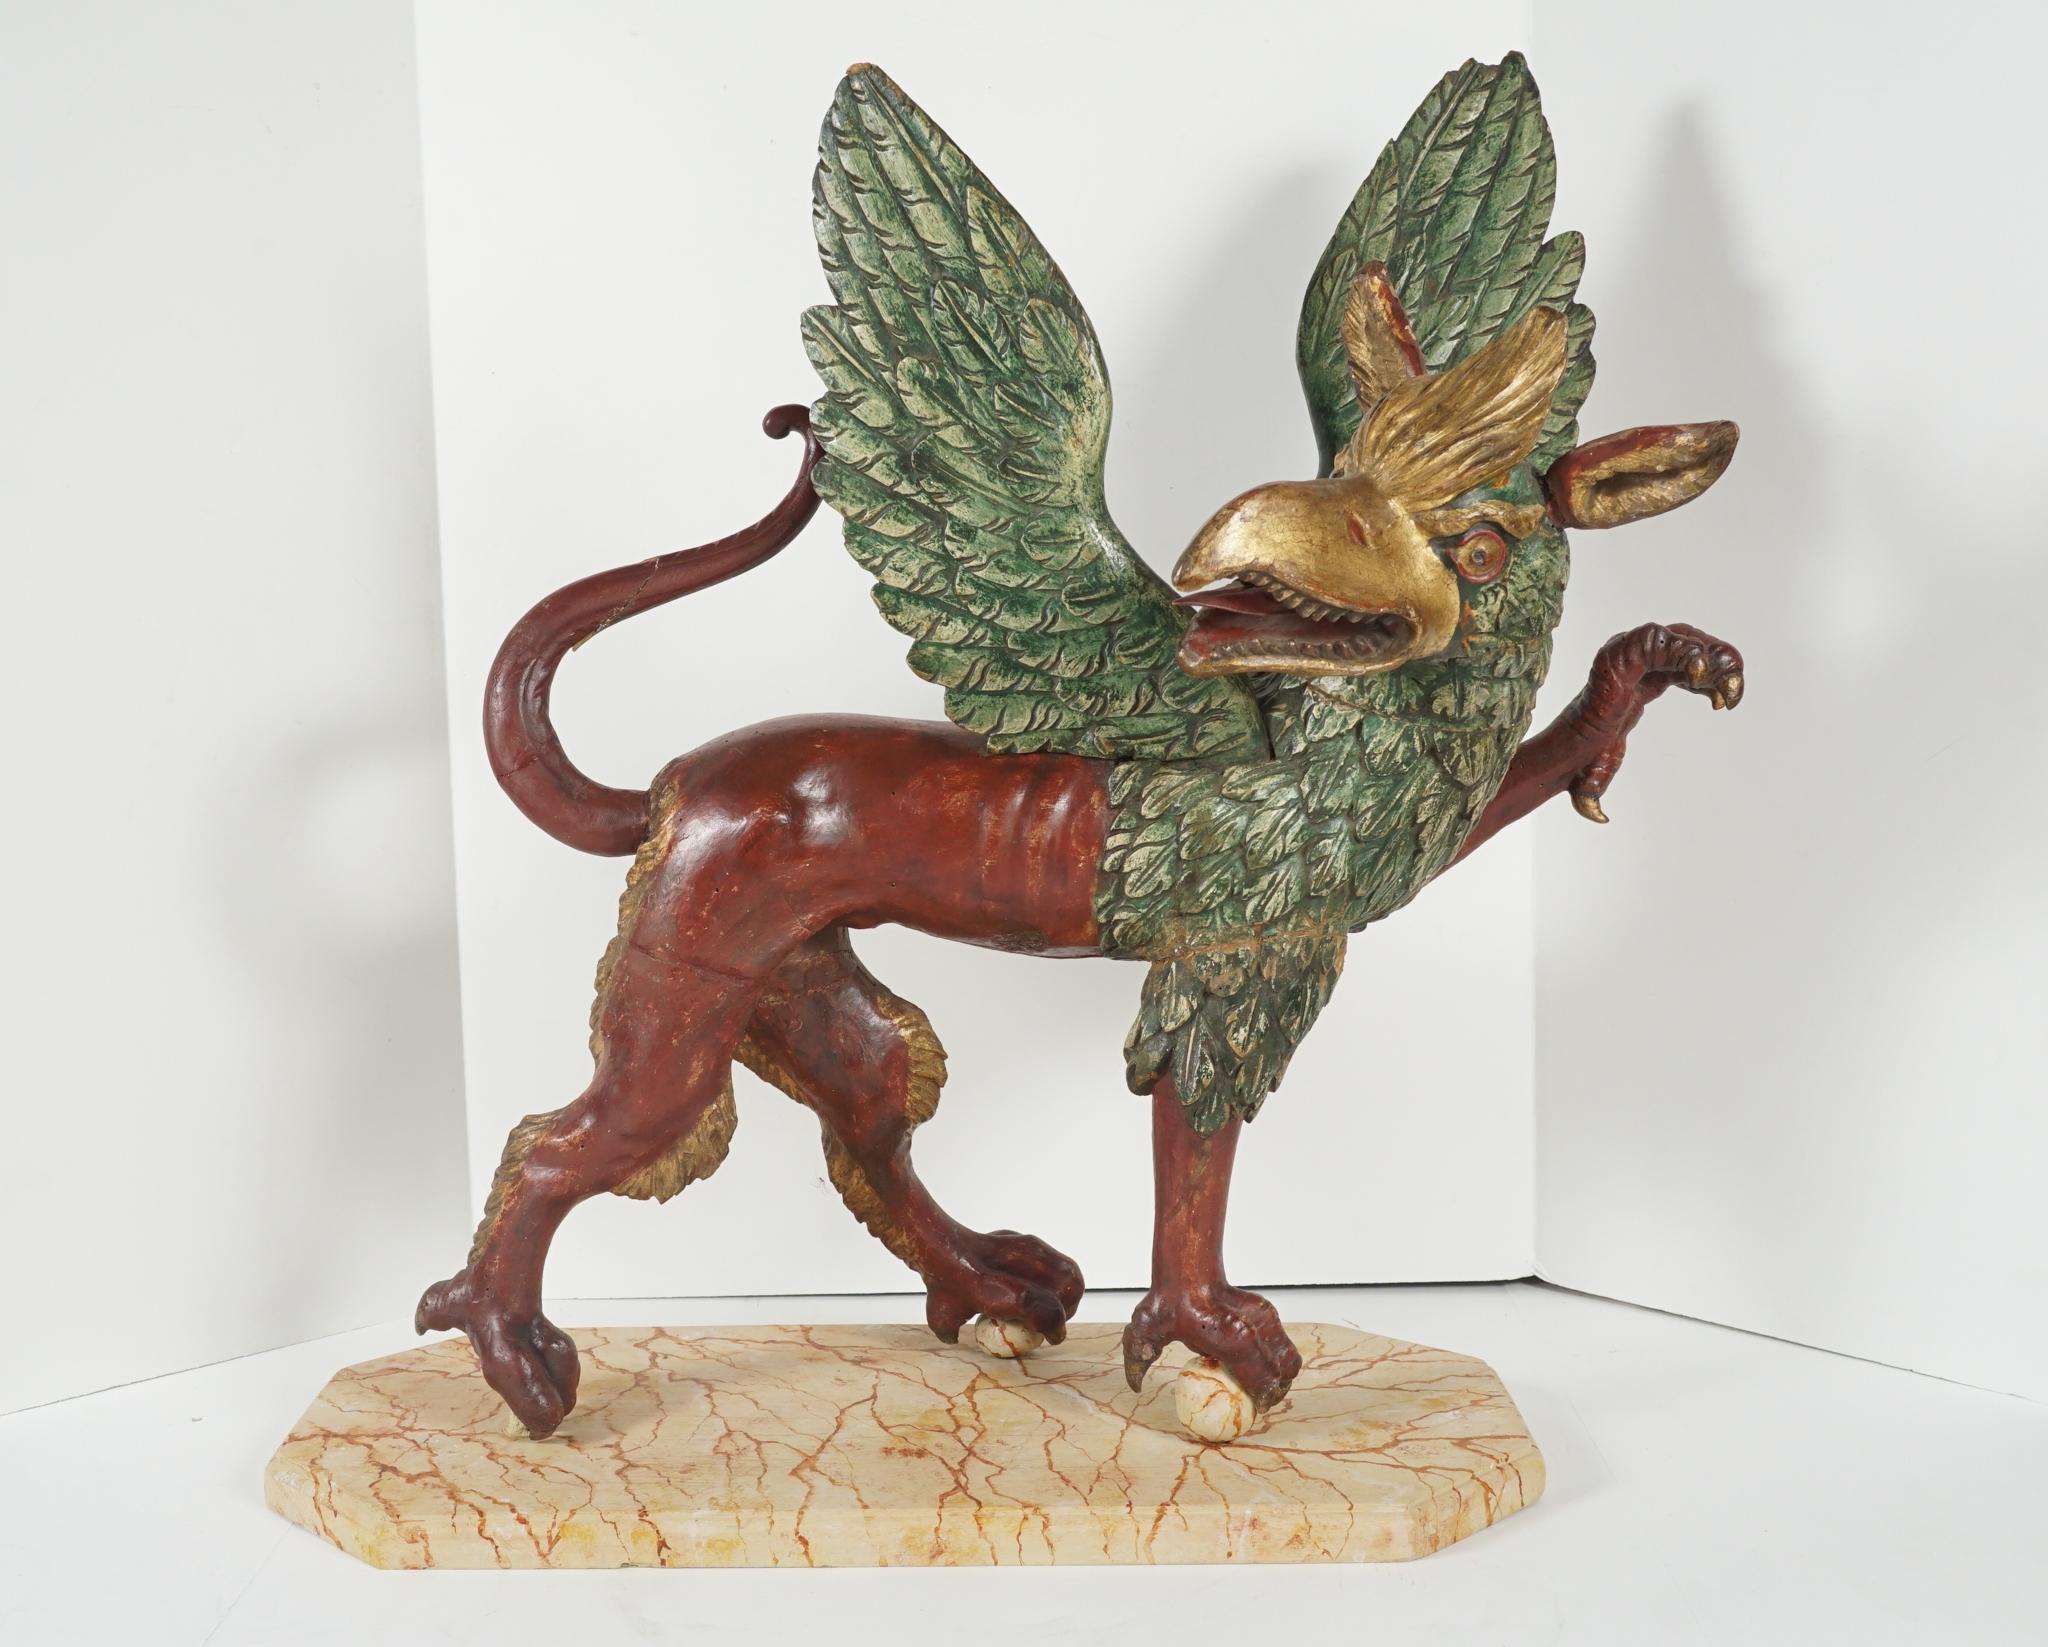 This large 18th century figure of a dramatic and animated Griffon was made in Italy in the mid-18th century. Carved in great detail then gessoed, painted and gilded the figure stands with one claw raised while two others grip balls. The base